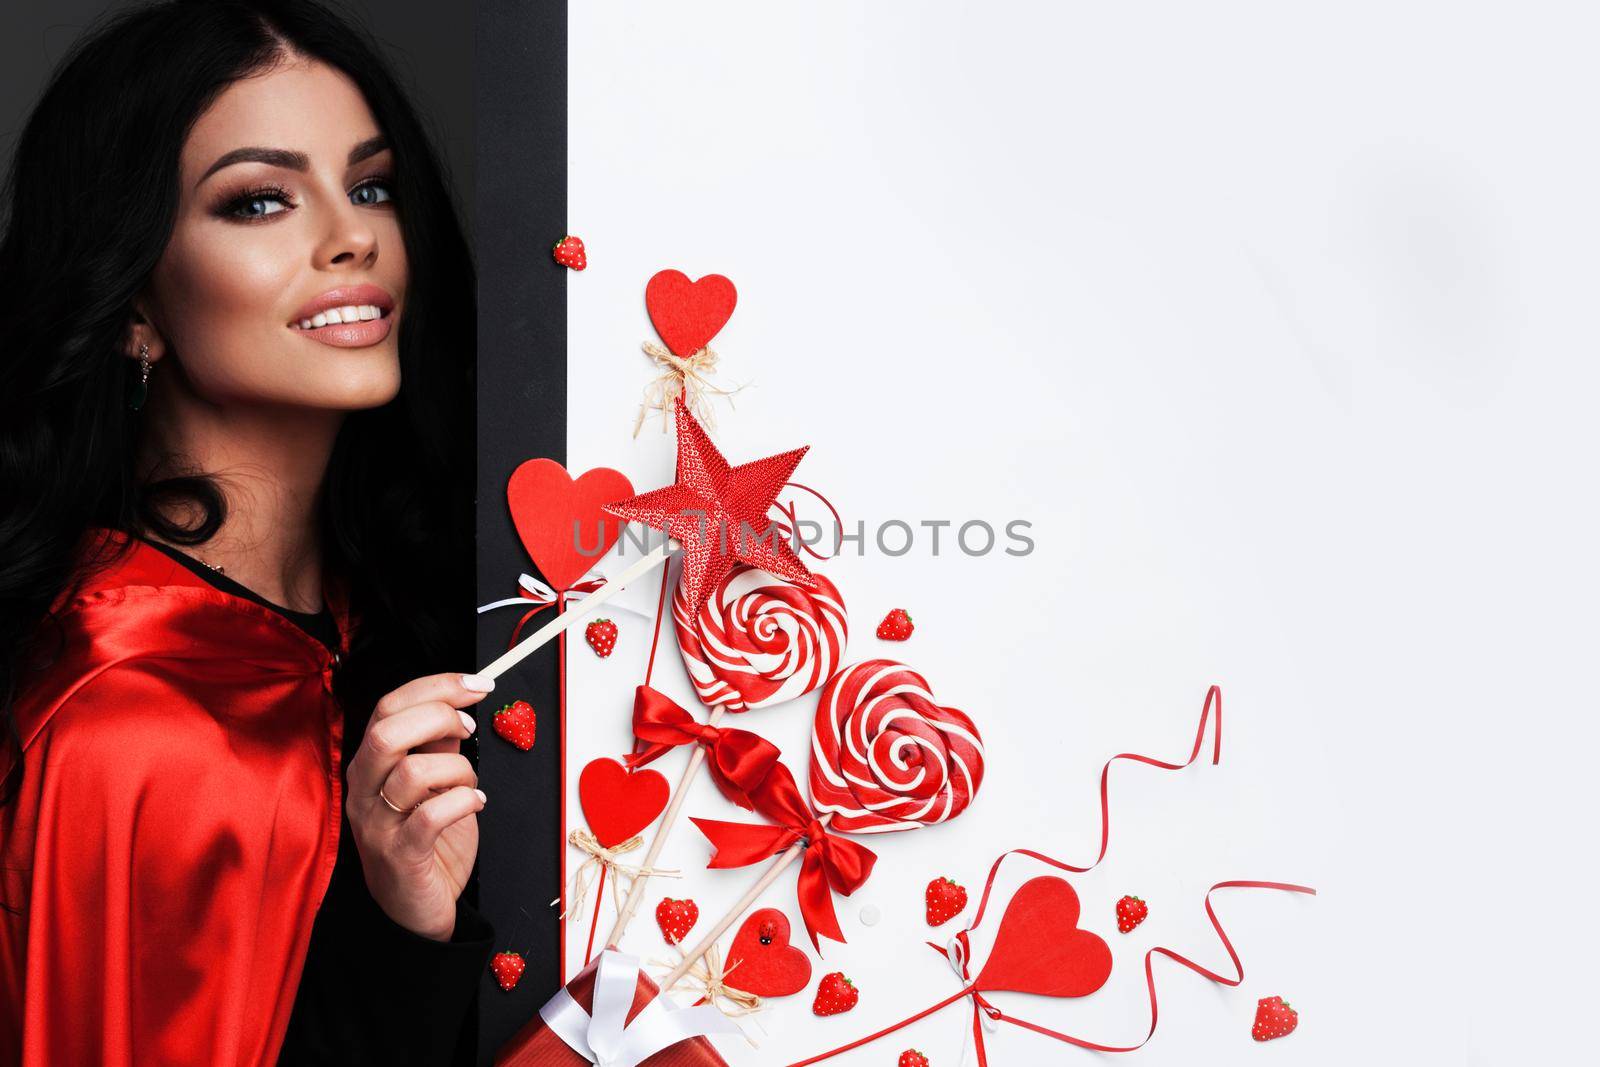 Woman with magic wand near Valentines day decoration and heart shaped lollipops isolated on white background